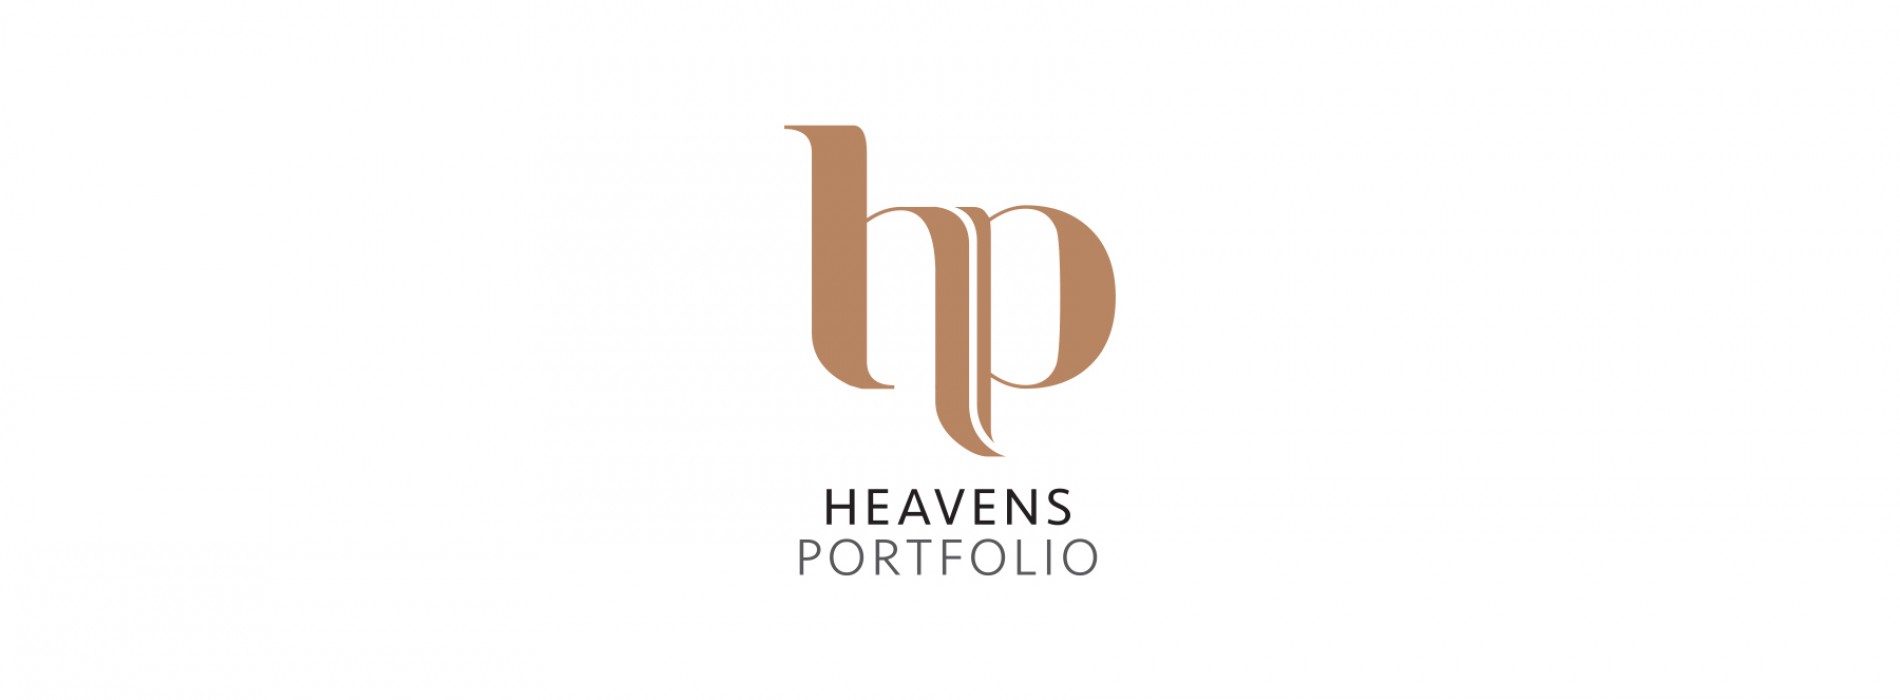 Heavens Portfolio appoints Yamini Singh as Regional Director of PR and Marketing in India & Middle East